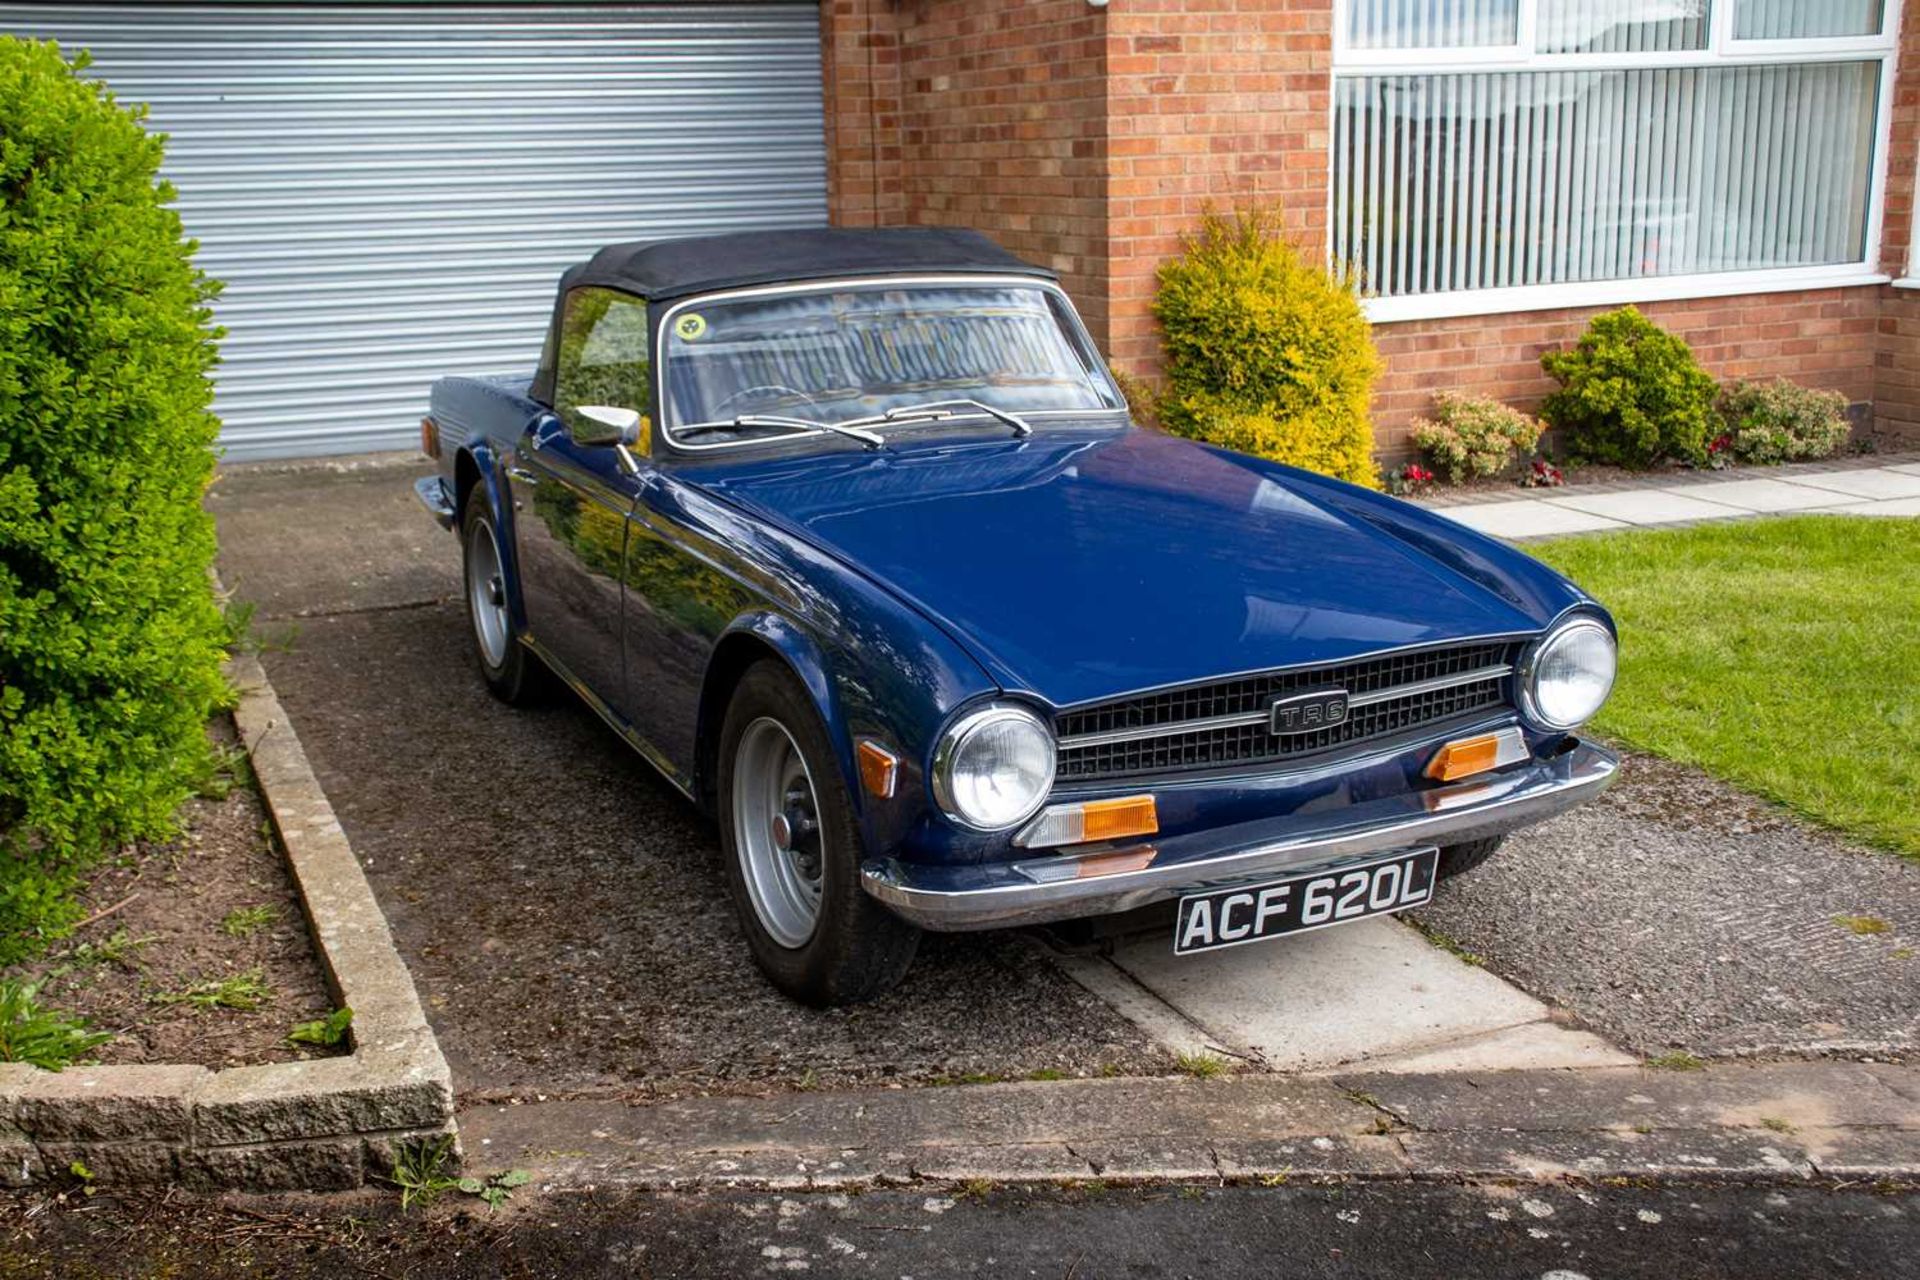 1972 Triumph TR6 Home market example, specified with manual overdrive transmission - Image 2 of 95